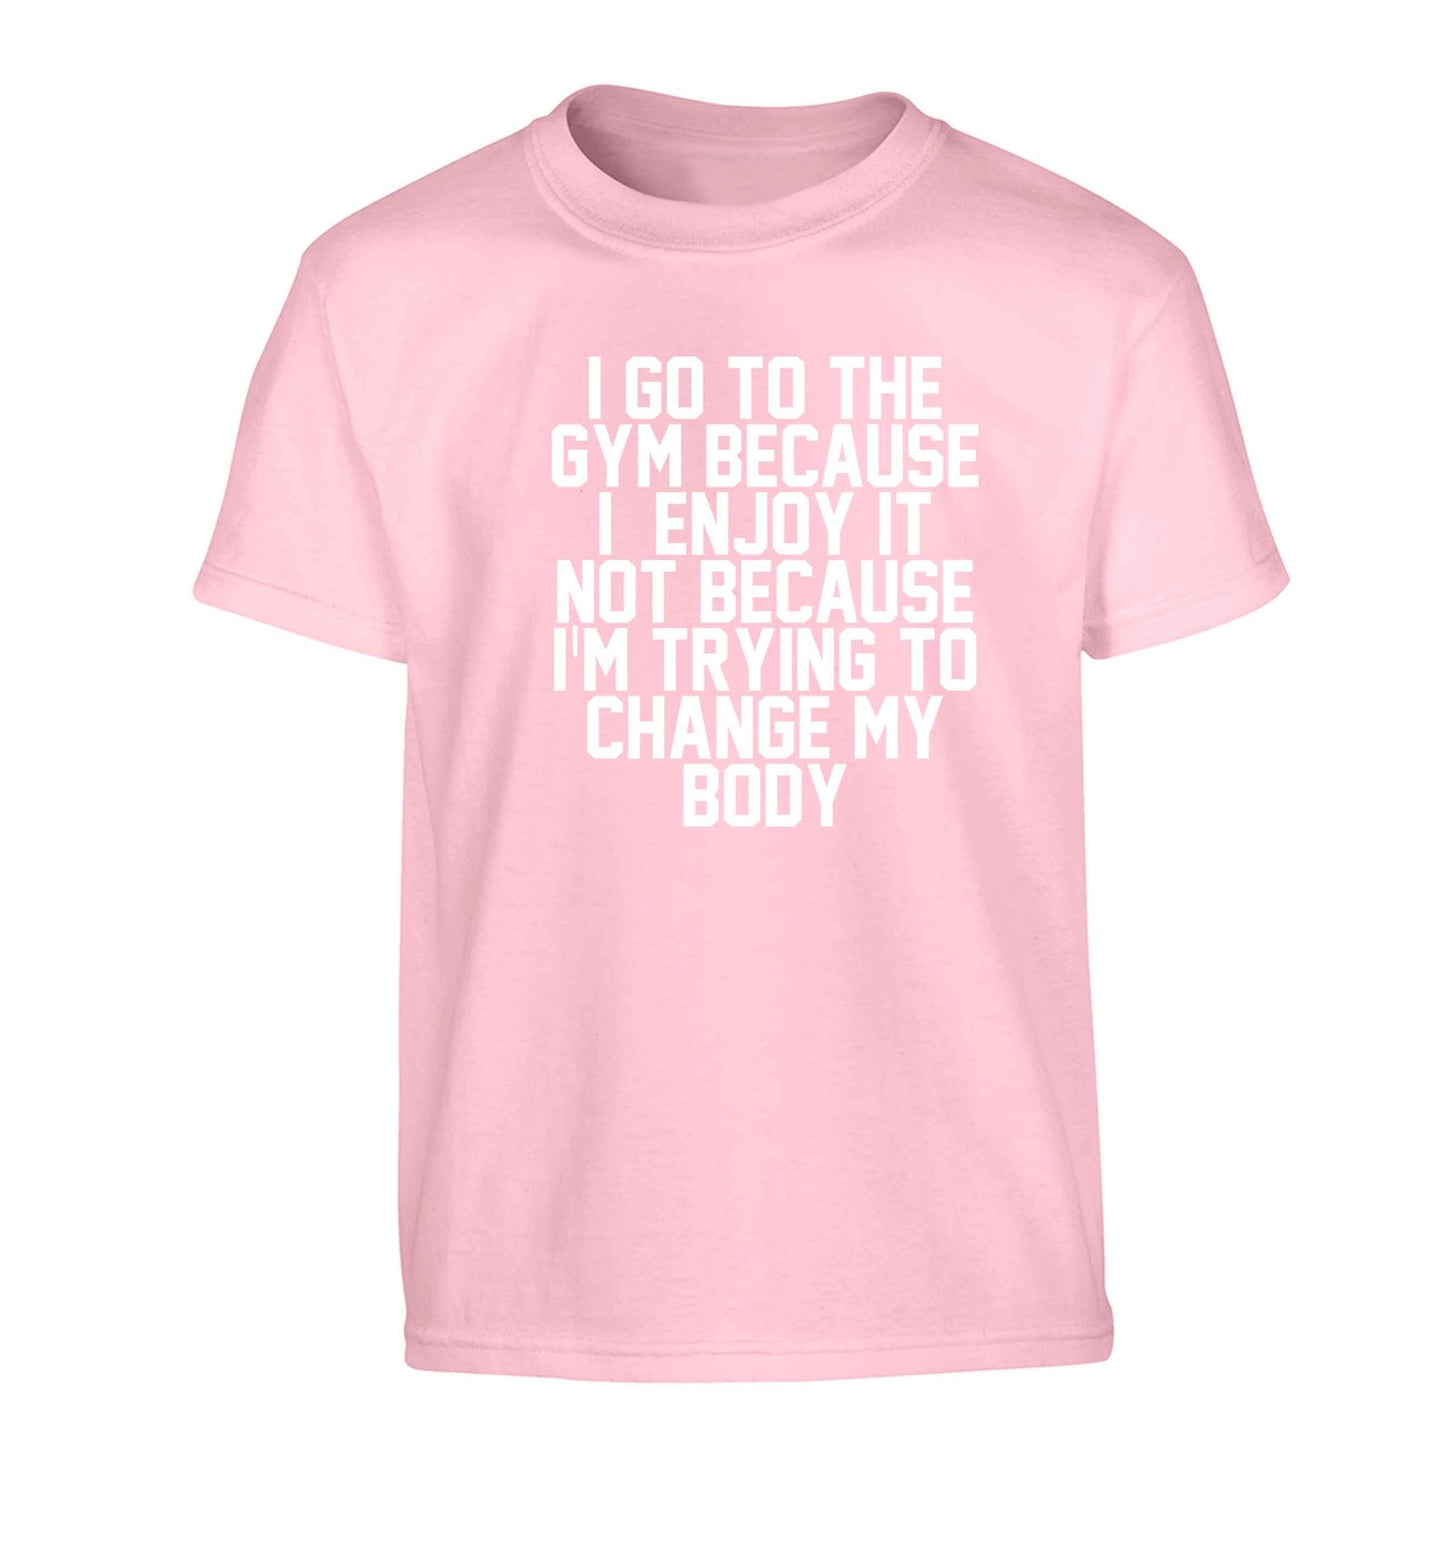 I go to the gym because I enjoy it not because I'm trying to change my body Children's light pink Tshirt 12-13 Years